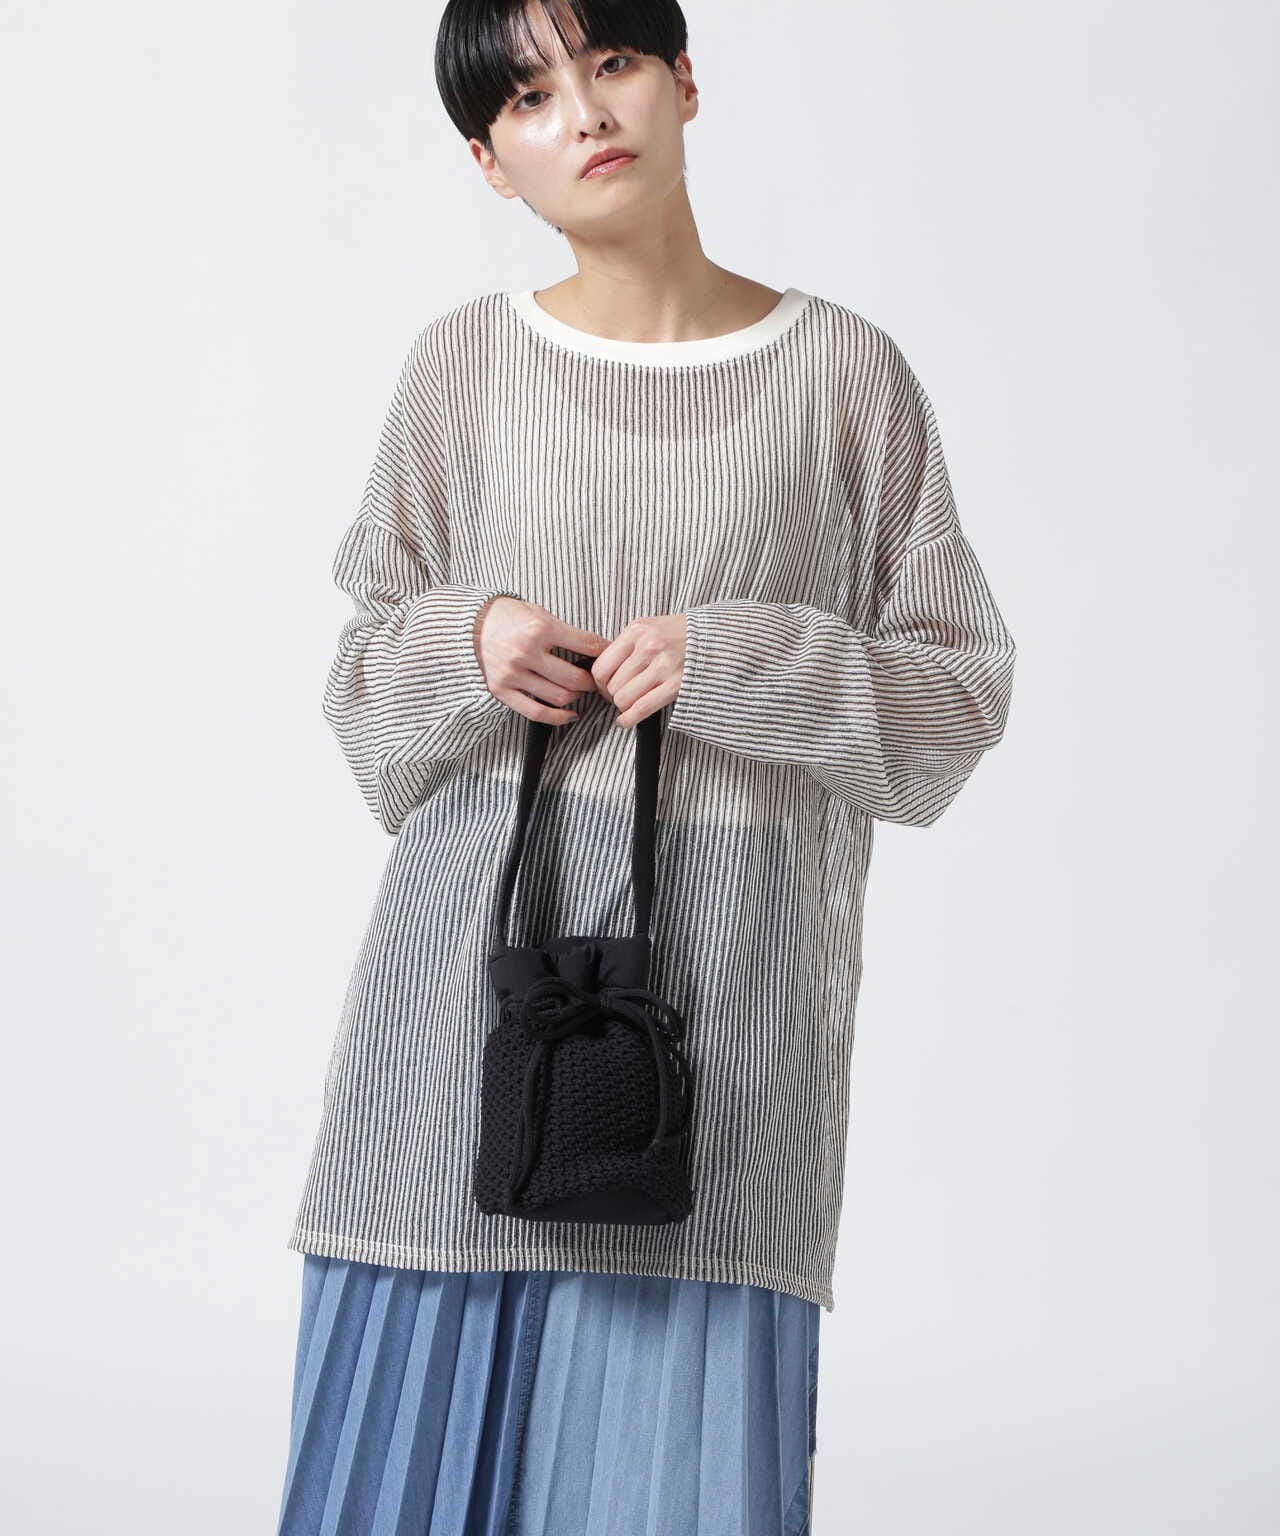 KNii(ニー) THE POUCH | B'2nd ( ビーセカンド ) | US ONLINE STORE